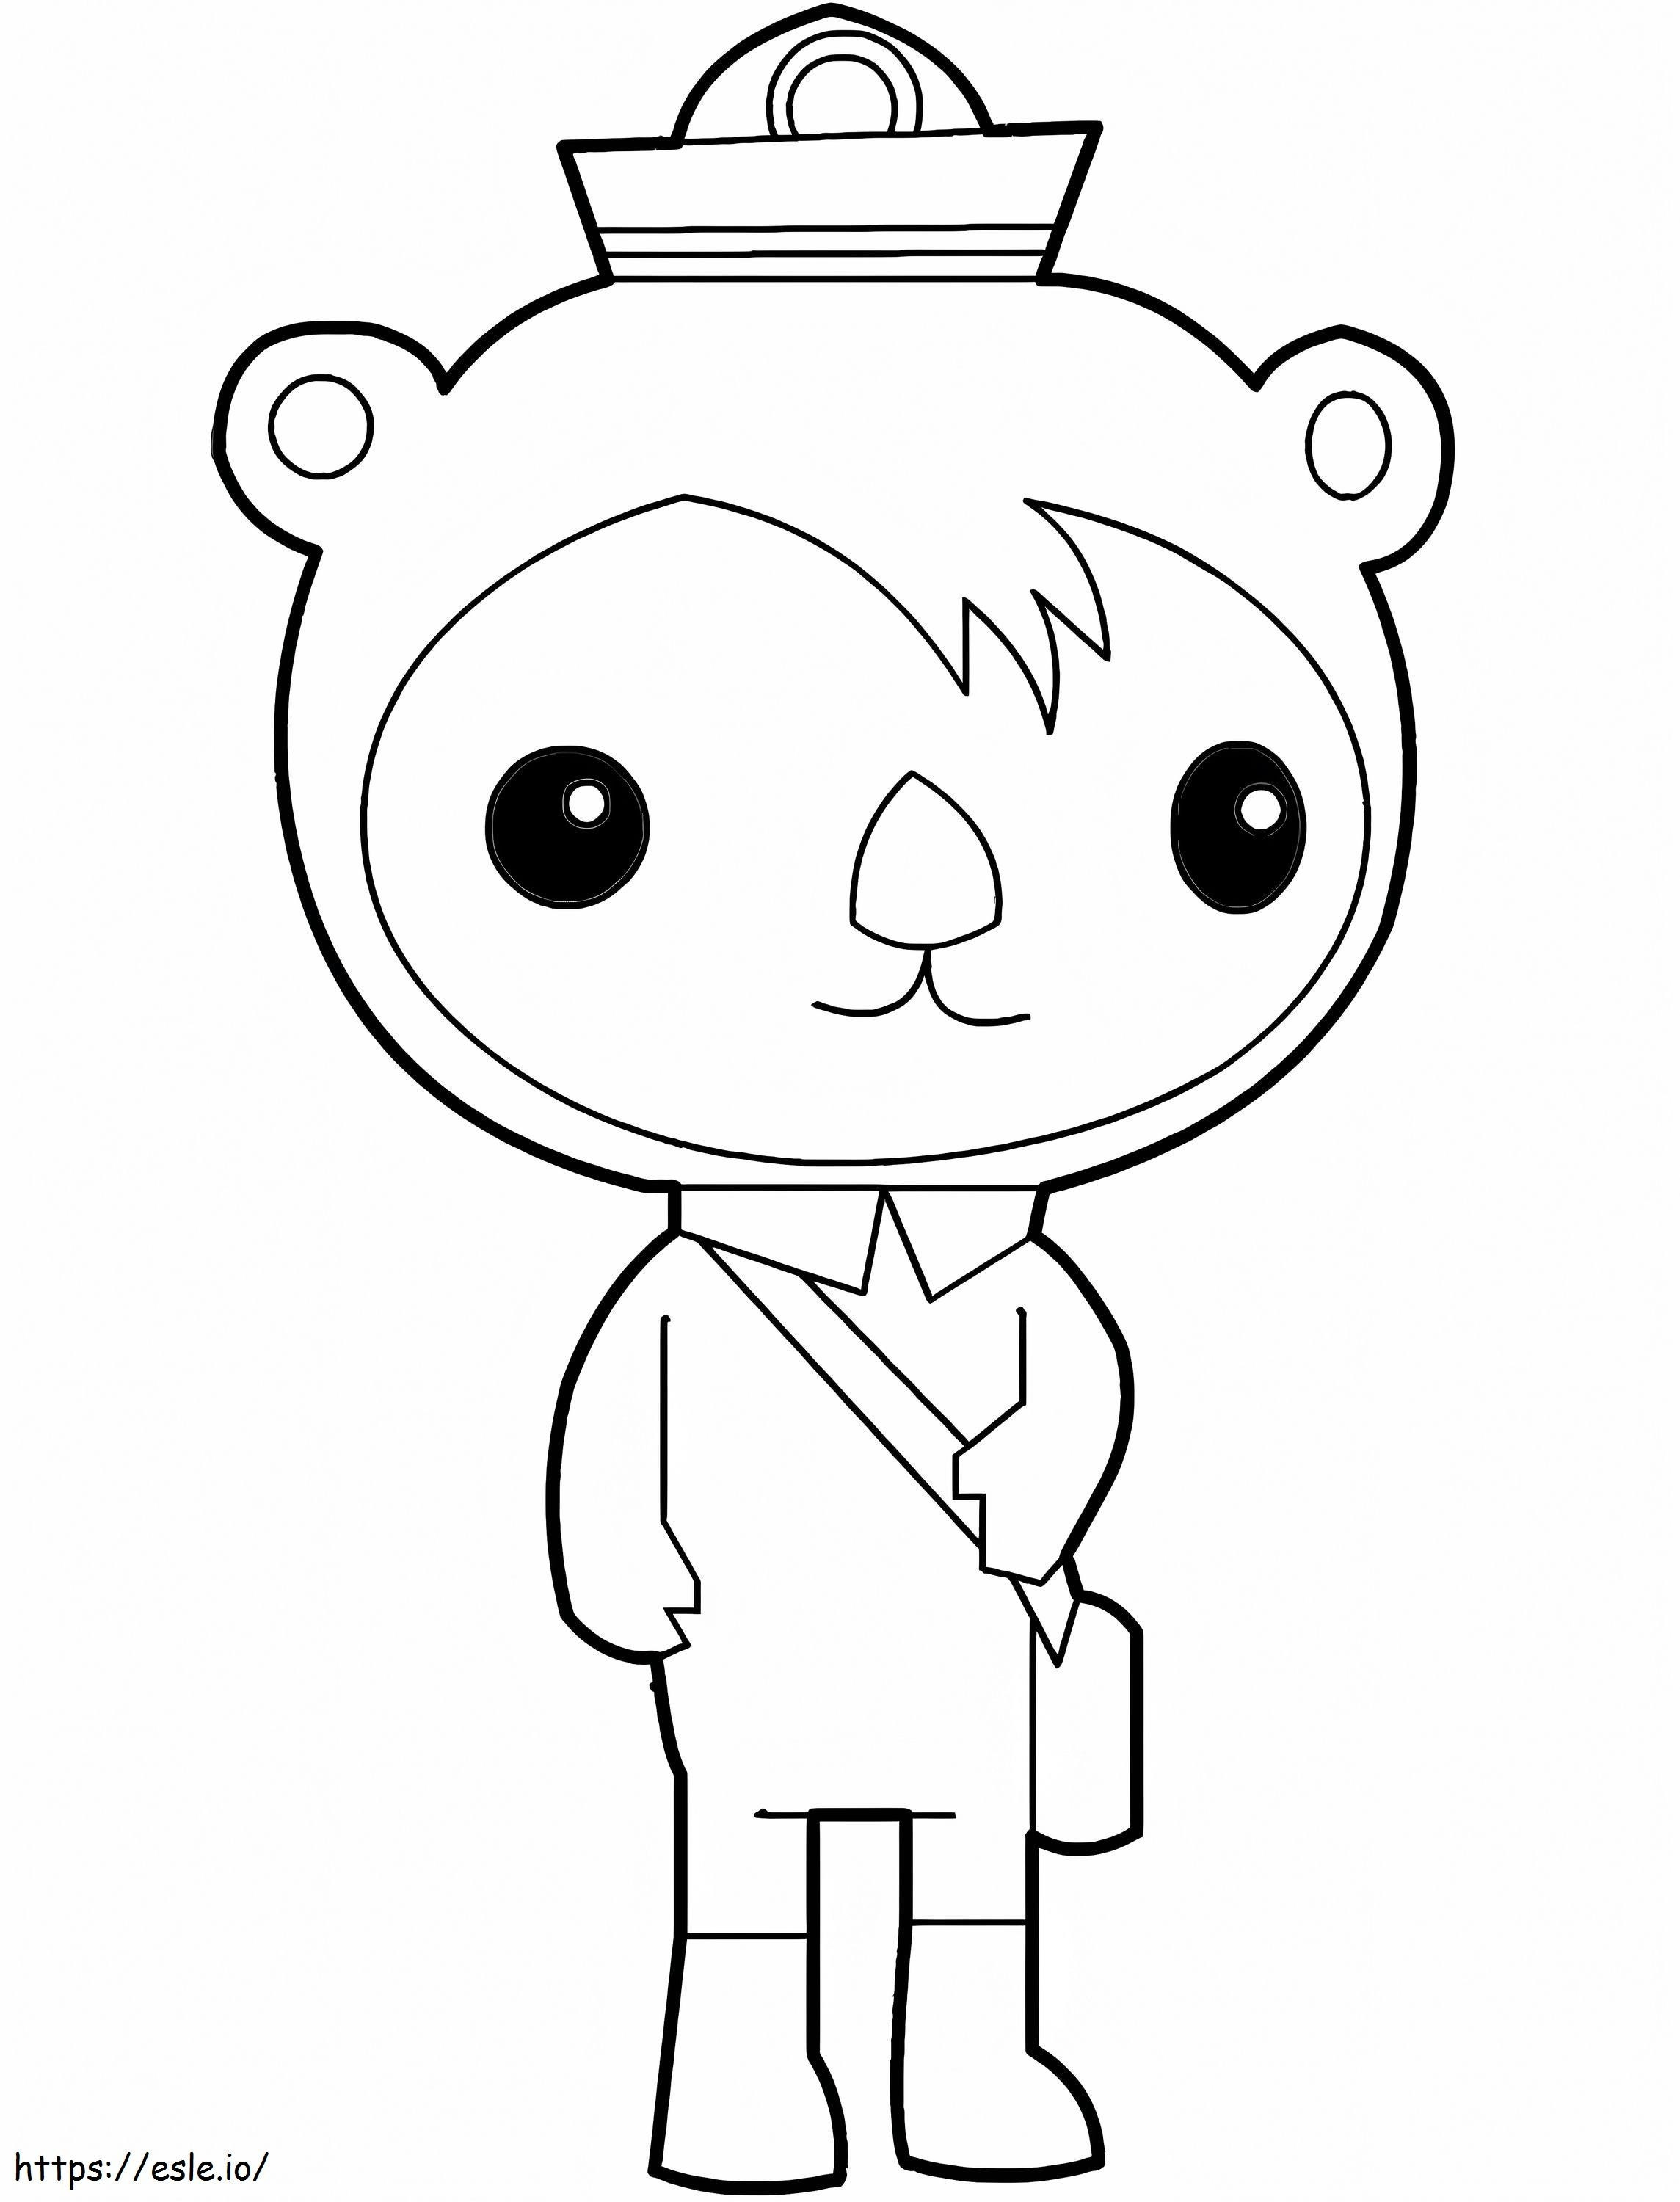 1567065408 Shellington In Octonauts A4 coloring page